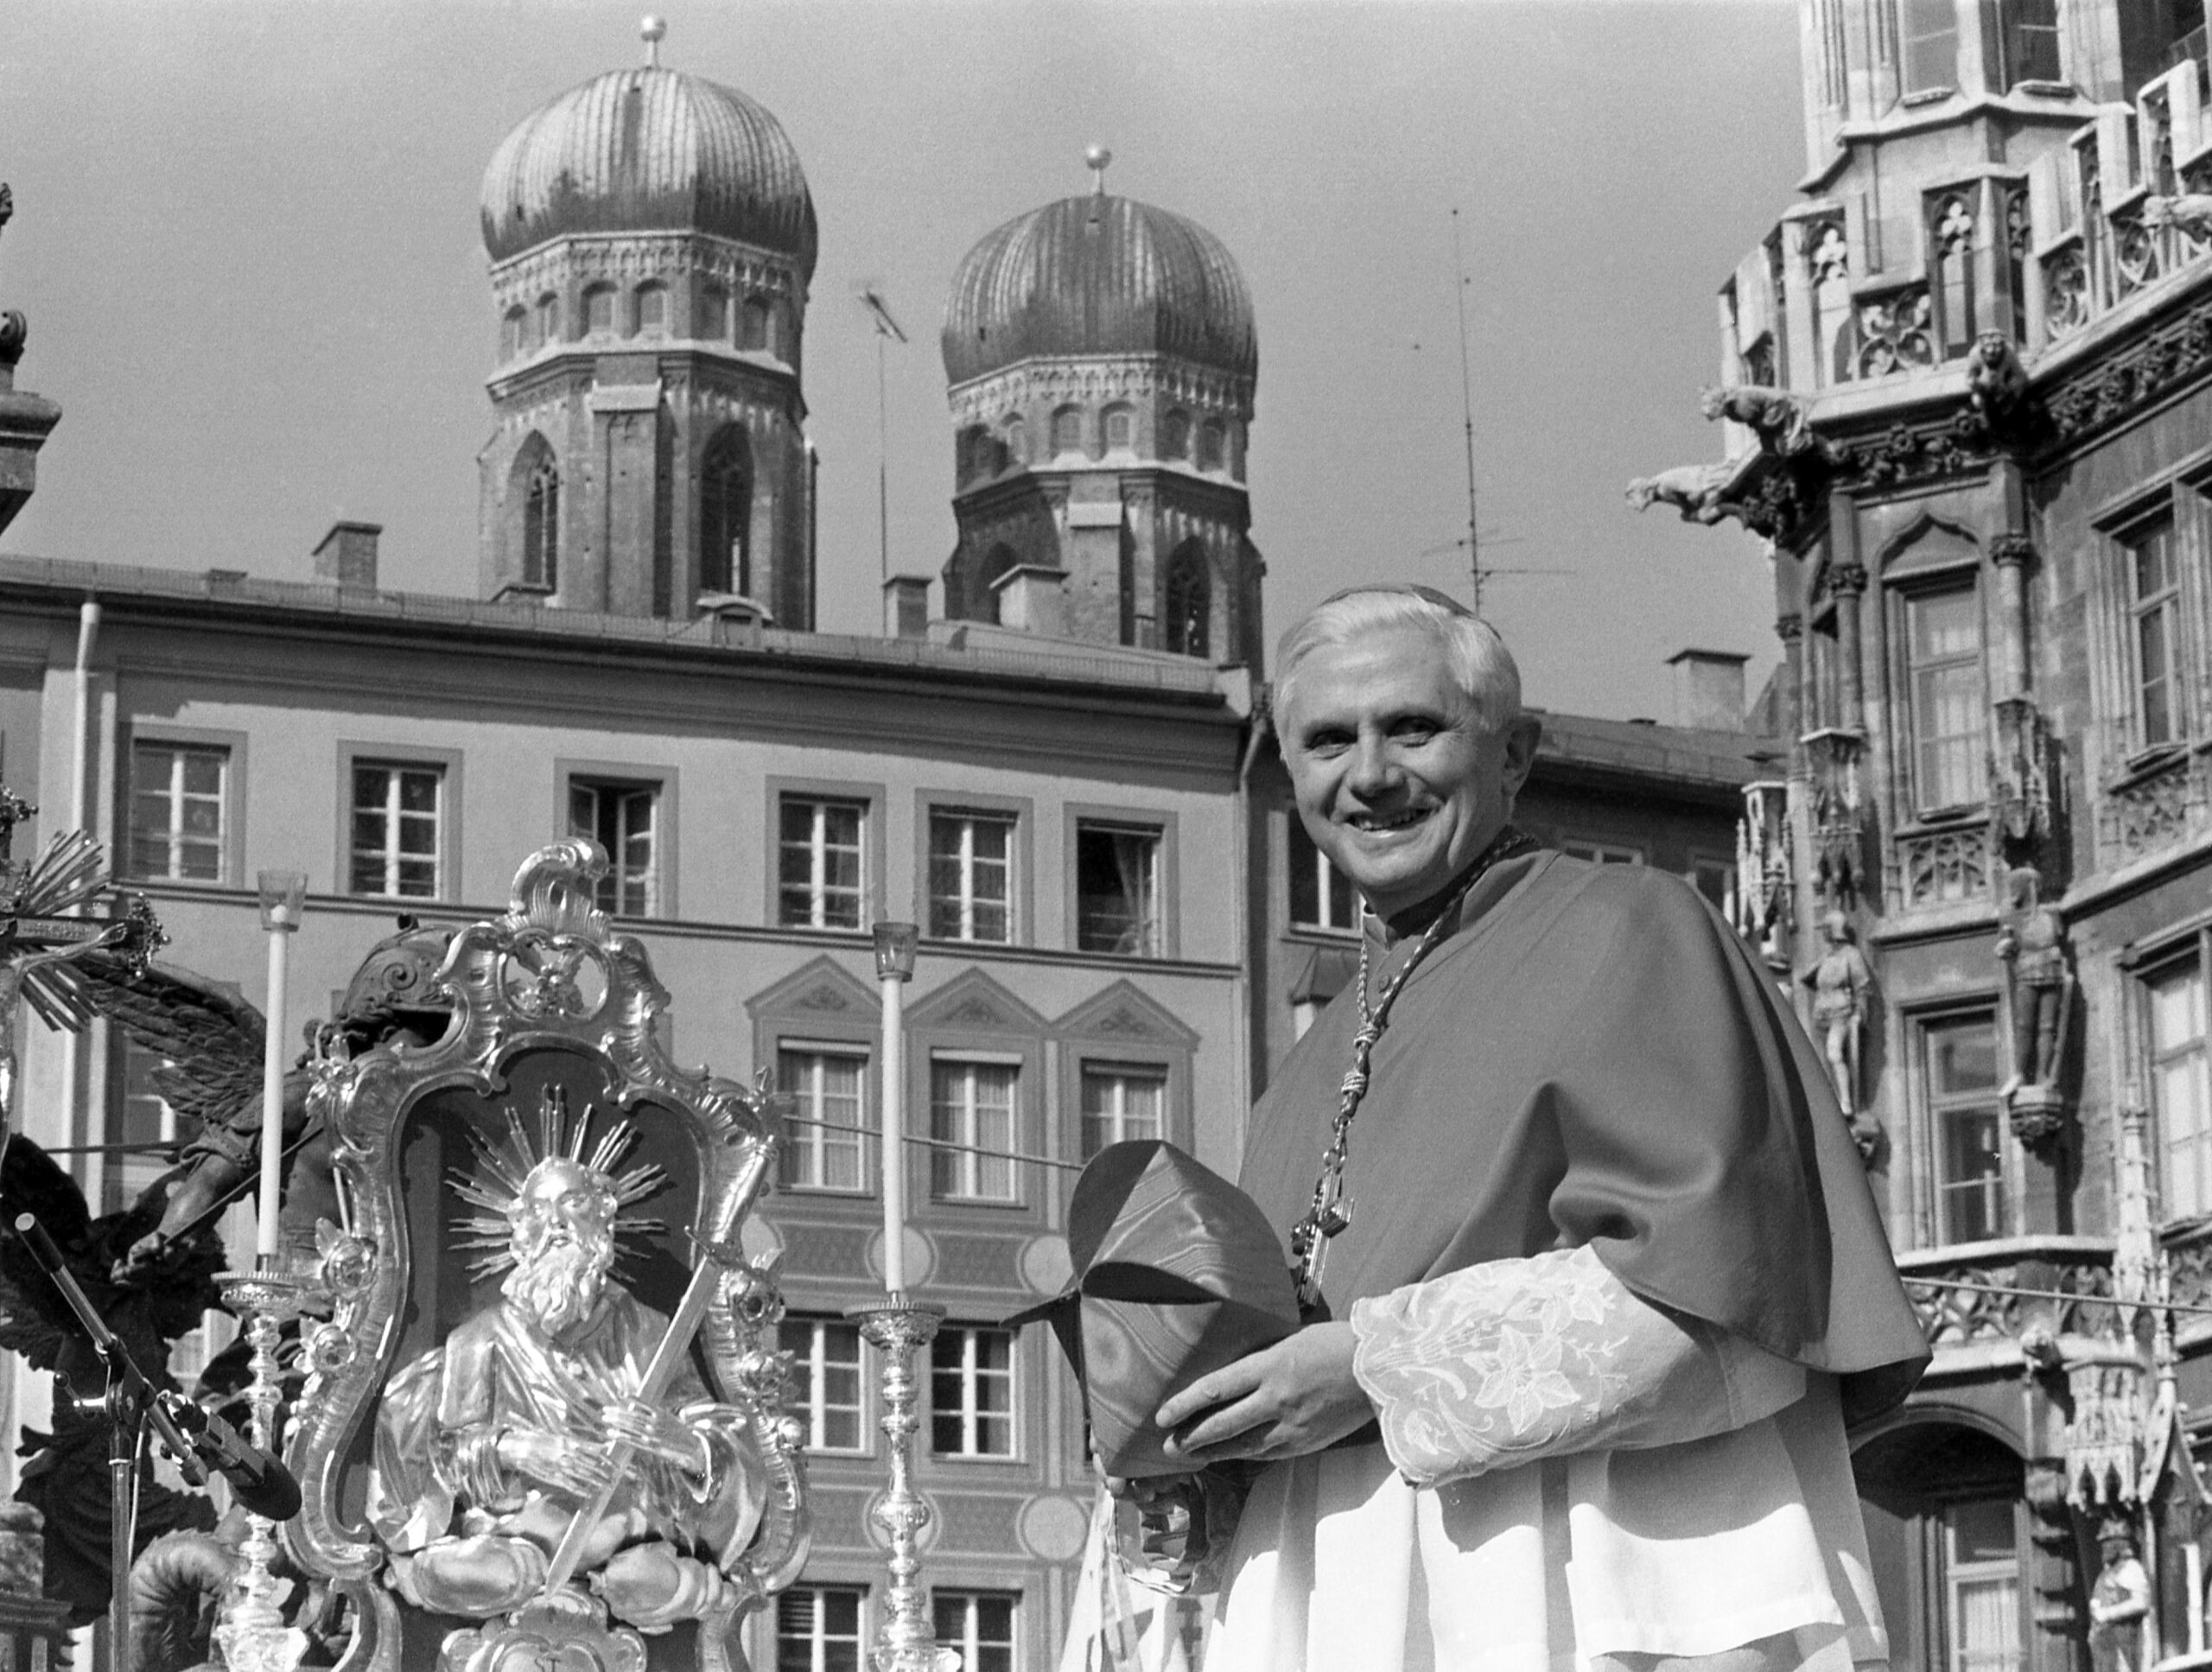 FILE - With the towers of Munich's cathedral in the background, Cardinal Joseph Ratzinger, later Pope Benedict XVI, bids farewell to the Bavarian believers in downtown Munich, Germany, Sunday, Feb. 28, 1982. The Vatican on Wednesday, Jan. 26, 2022 strongly defended Pope Benedict XVI’s record in fighting clergy sexual abuse and cautioned against looking for “easy scapegoats and summary judgments,” after an independent report faulted his handling of four cases of abuse when he was archbishop of Munich, Germany. (AP Photo/Dieter Endlicher, File)